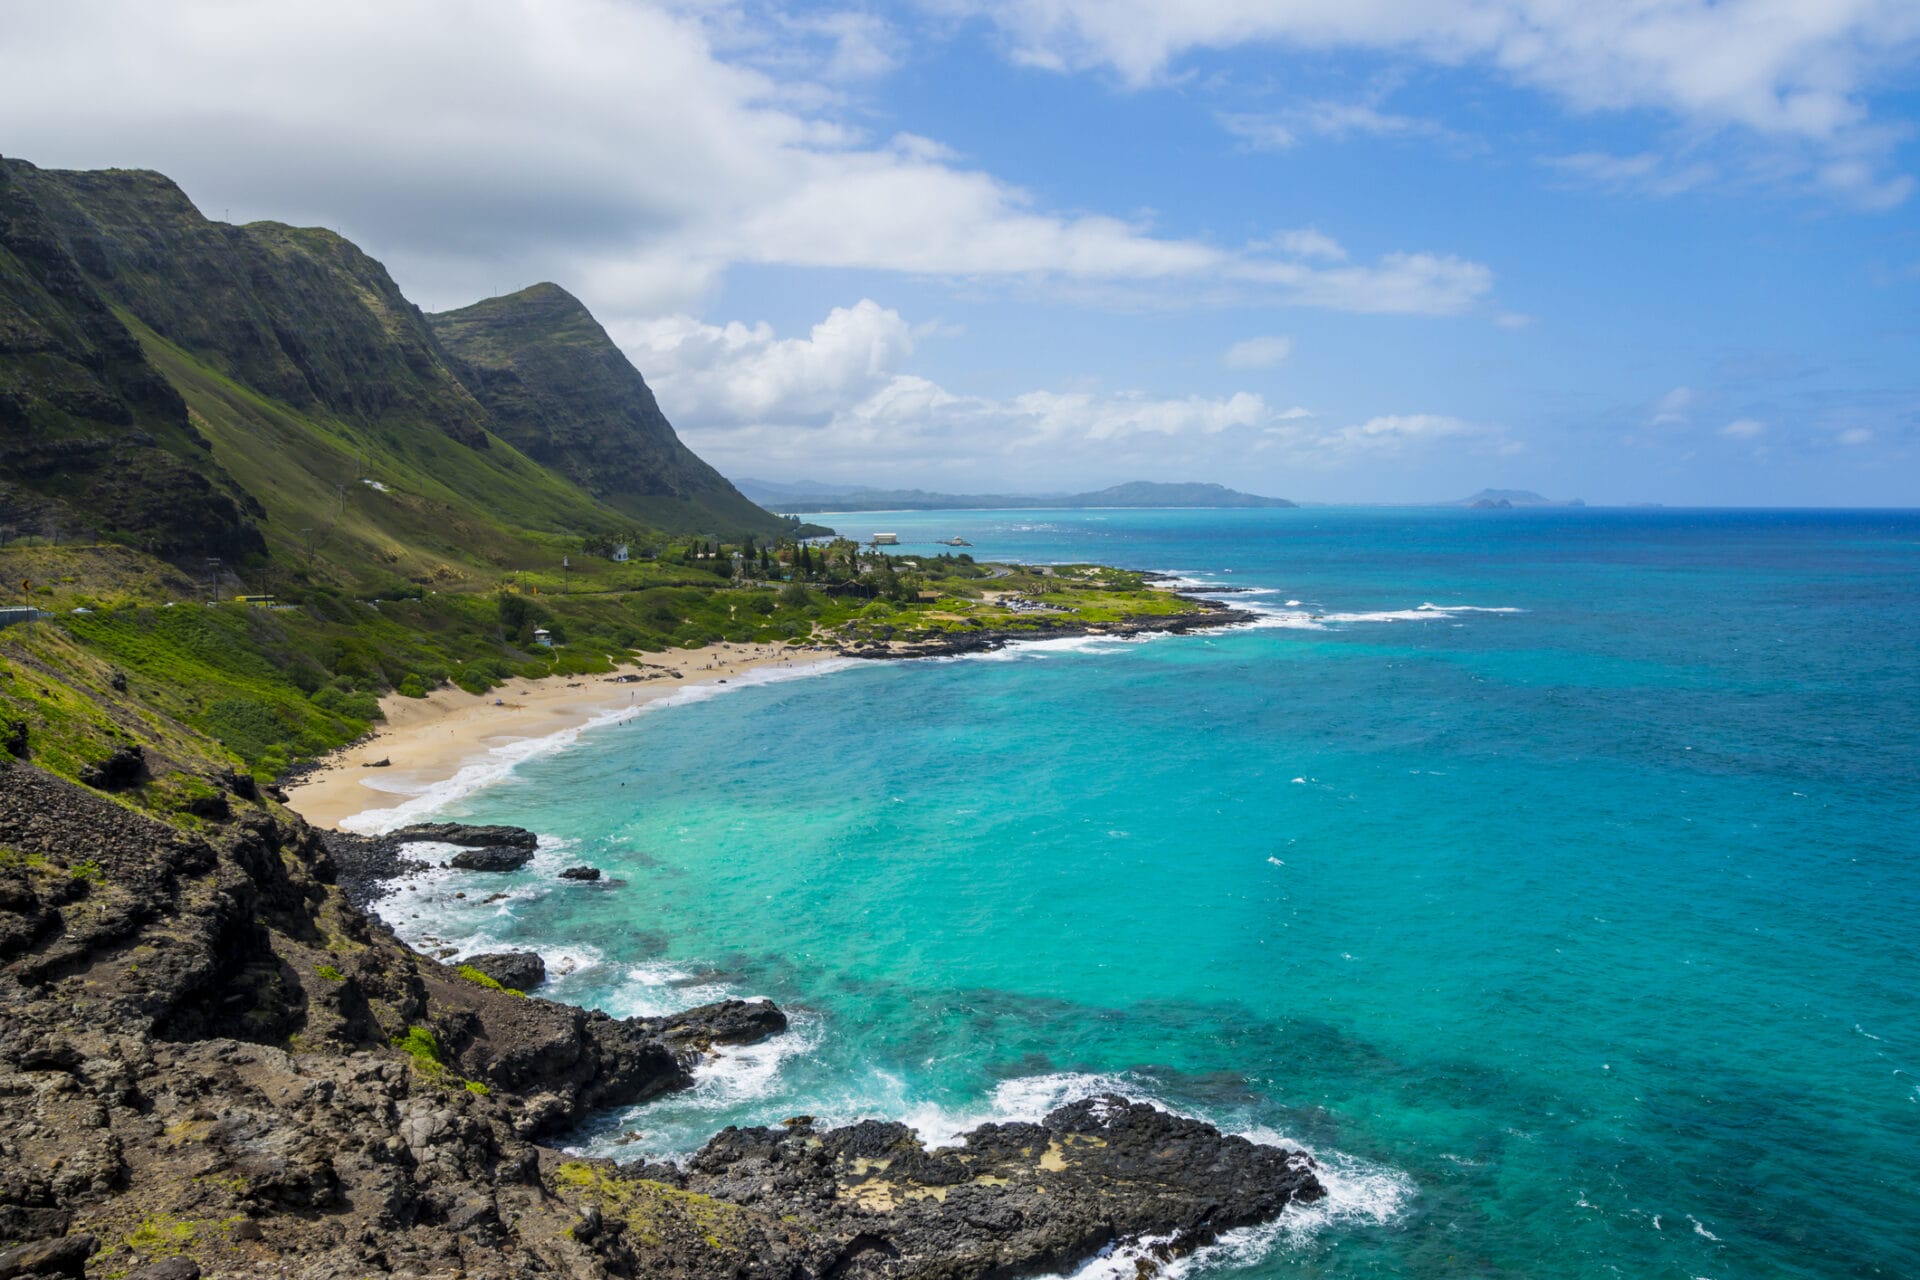 Backpacking Oahu on a Budget - Book with code: BACKPACK